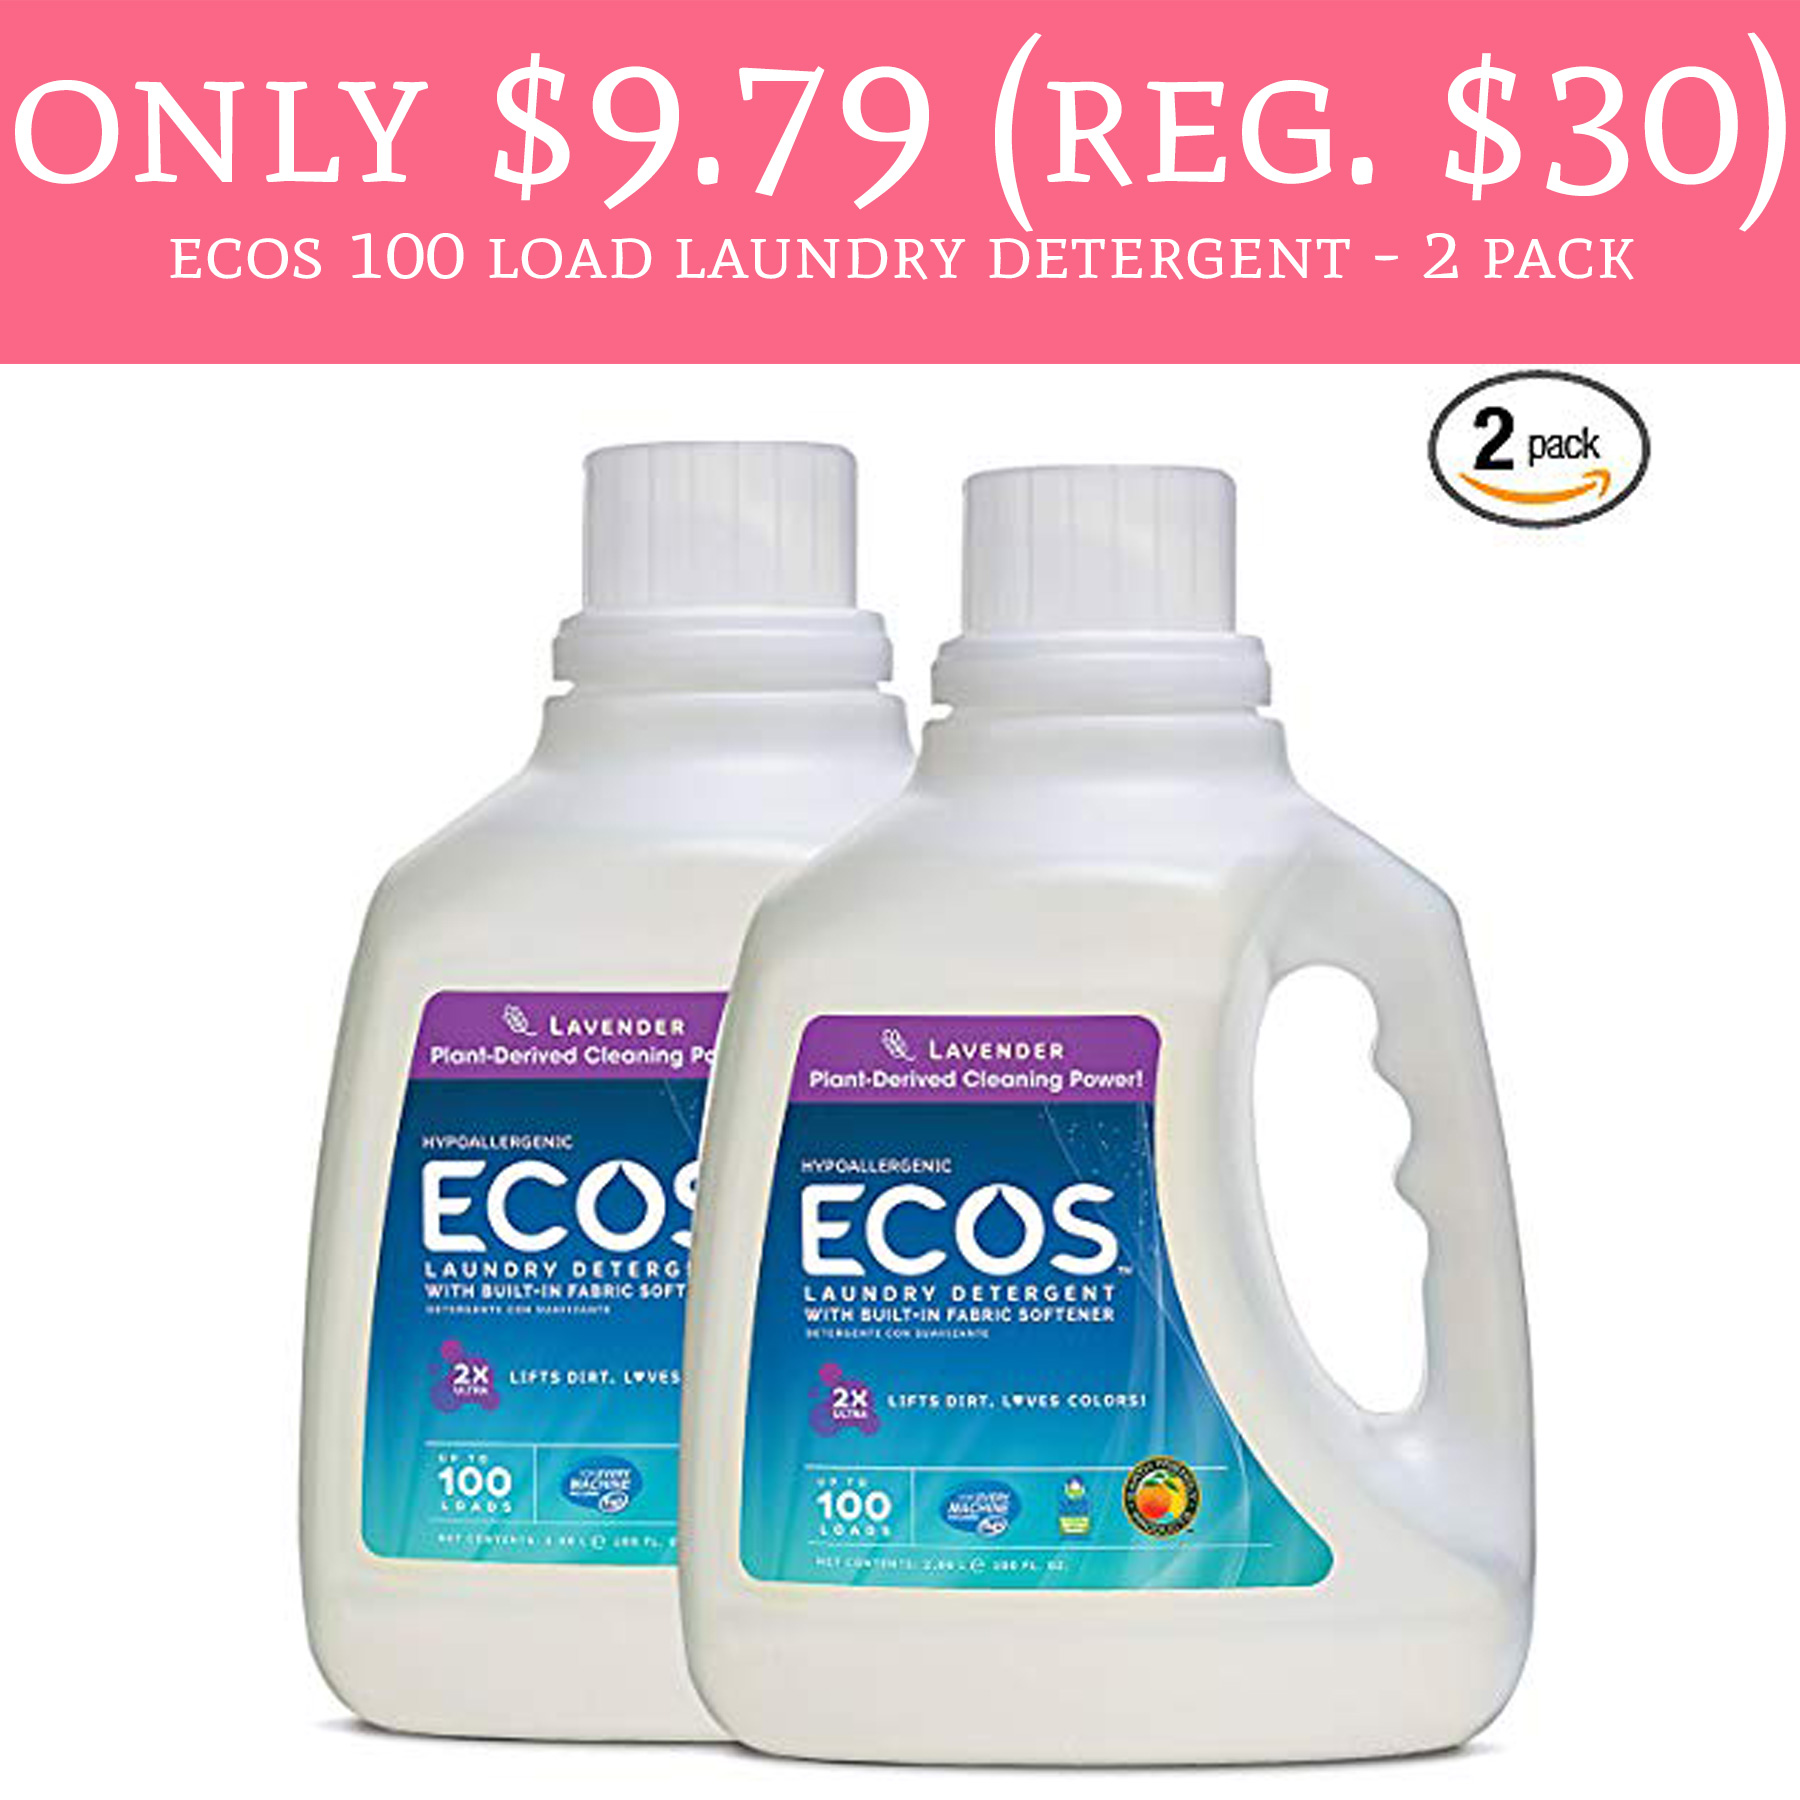 ecos-100-load-laundry-detergent-2-pack